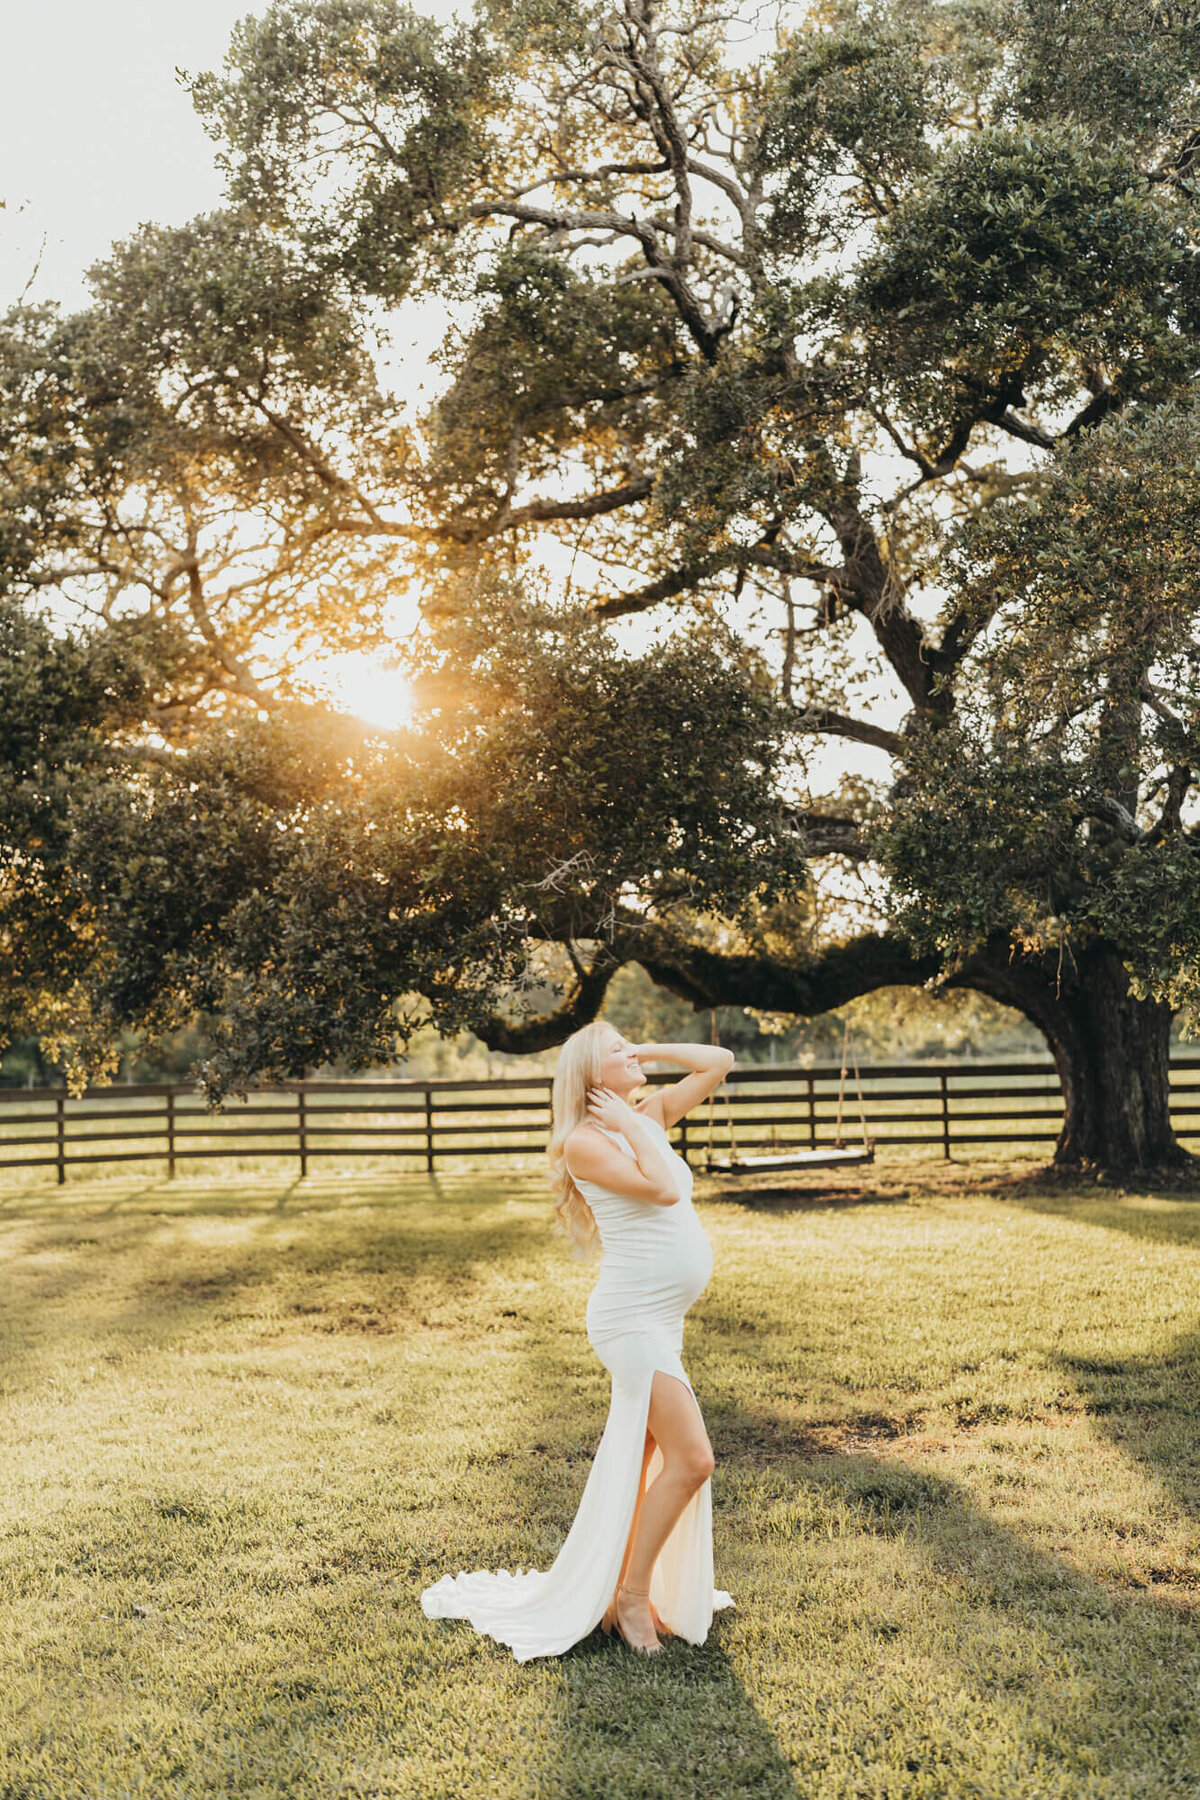 kaylyn wears a fitted white gown for her maternity session in lake jackson under a huge oak tree.